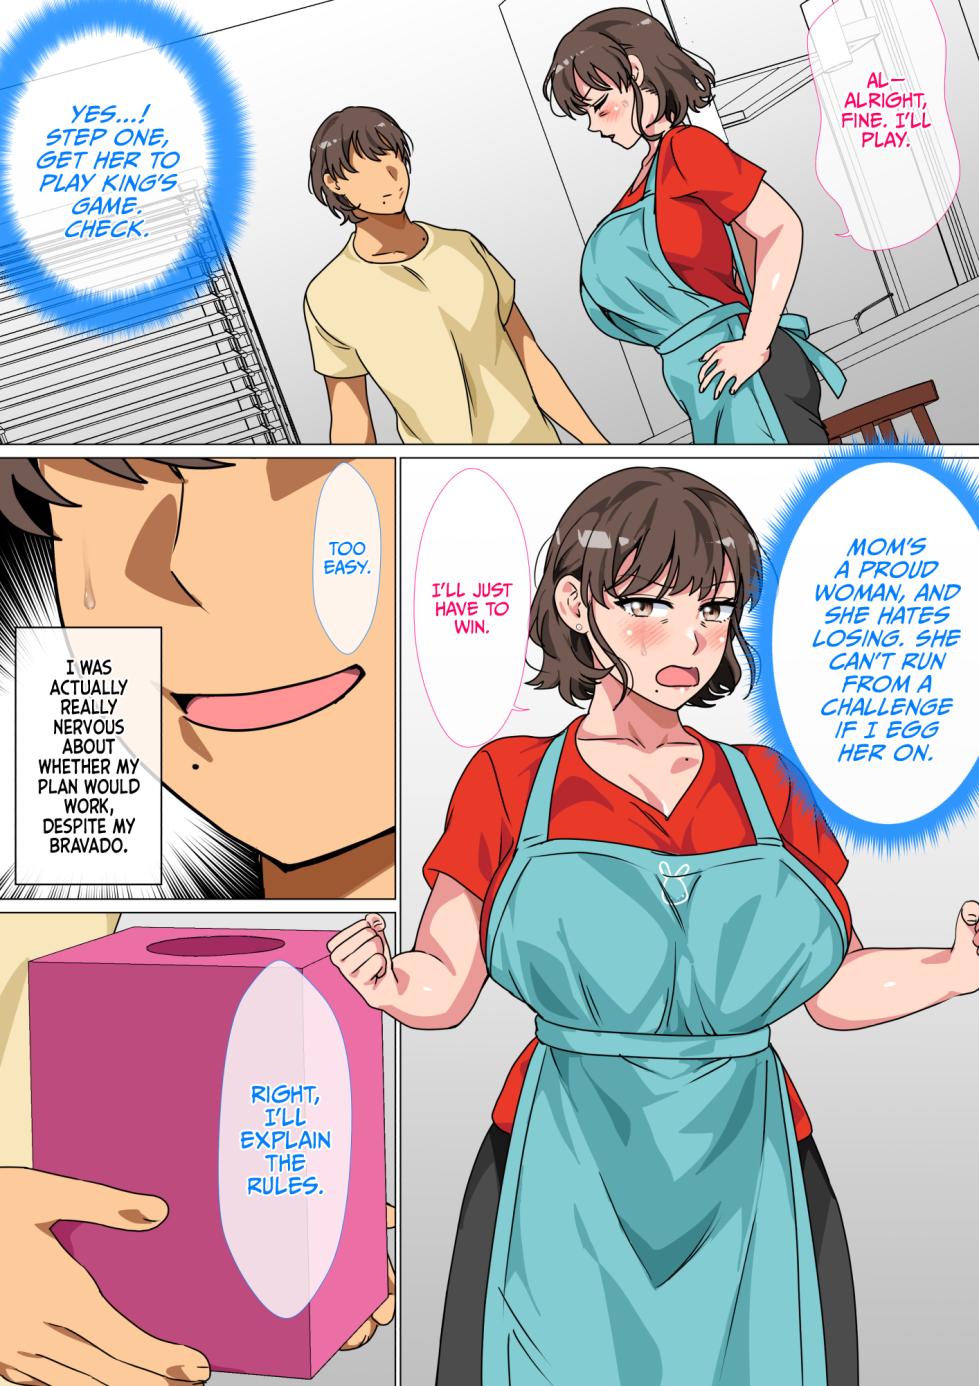 [Circle Spice] Ousama Game no Meirei de Haha to Sex Shita Hanashi | I Ordered My Mom to Have Sex with Me in King's Game [English] {korafu} - Page 8